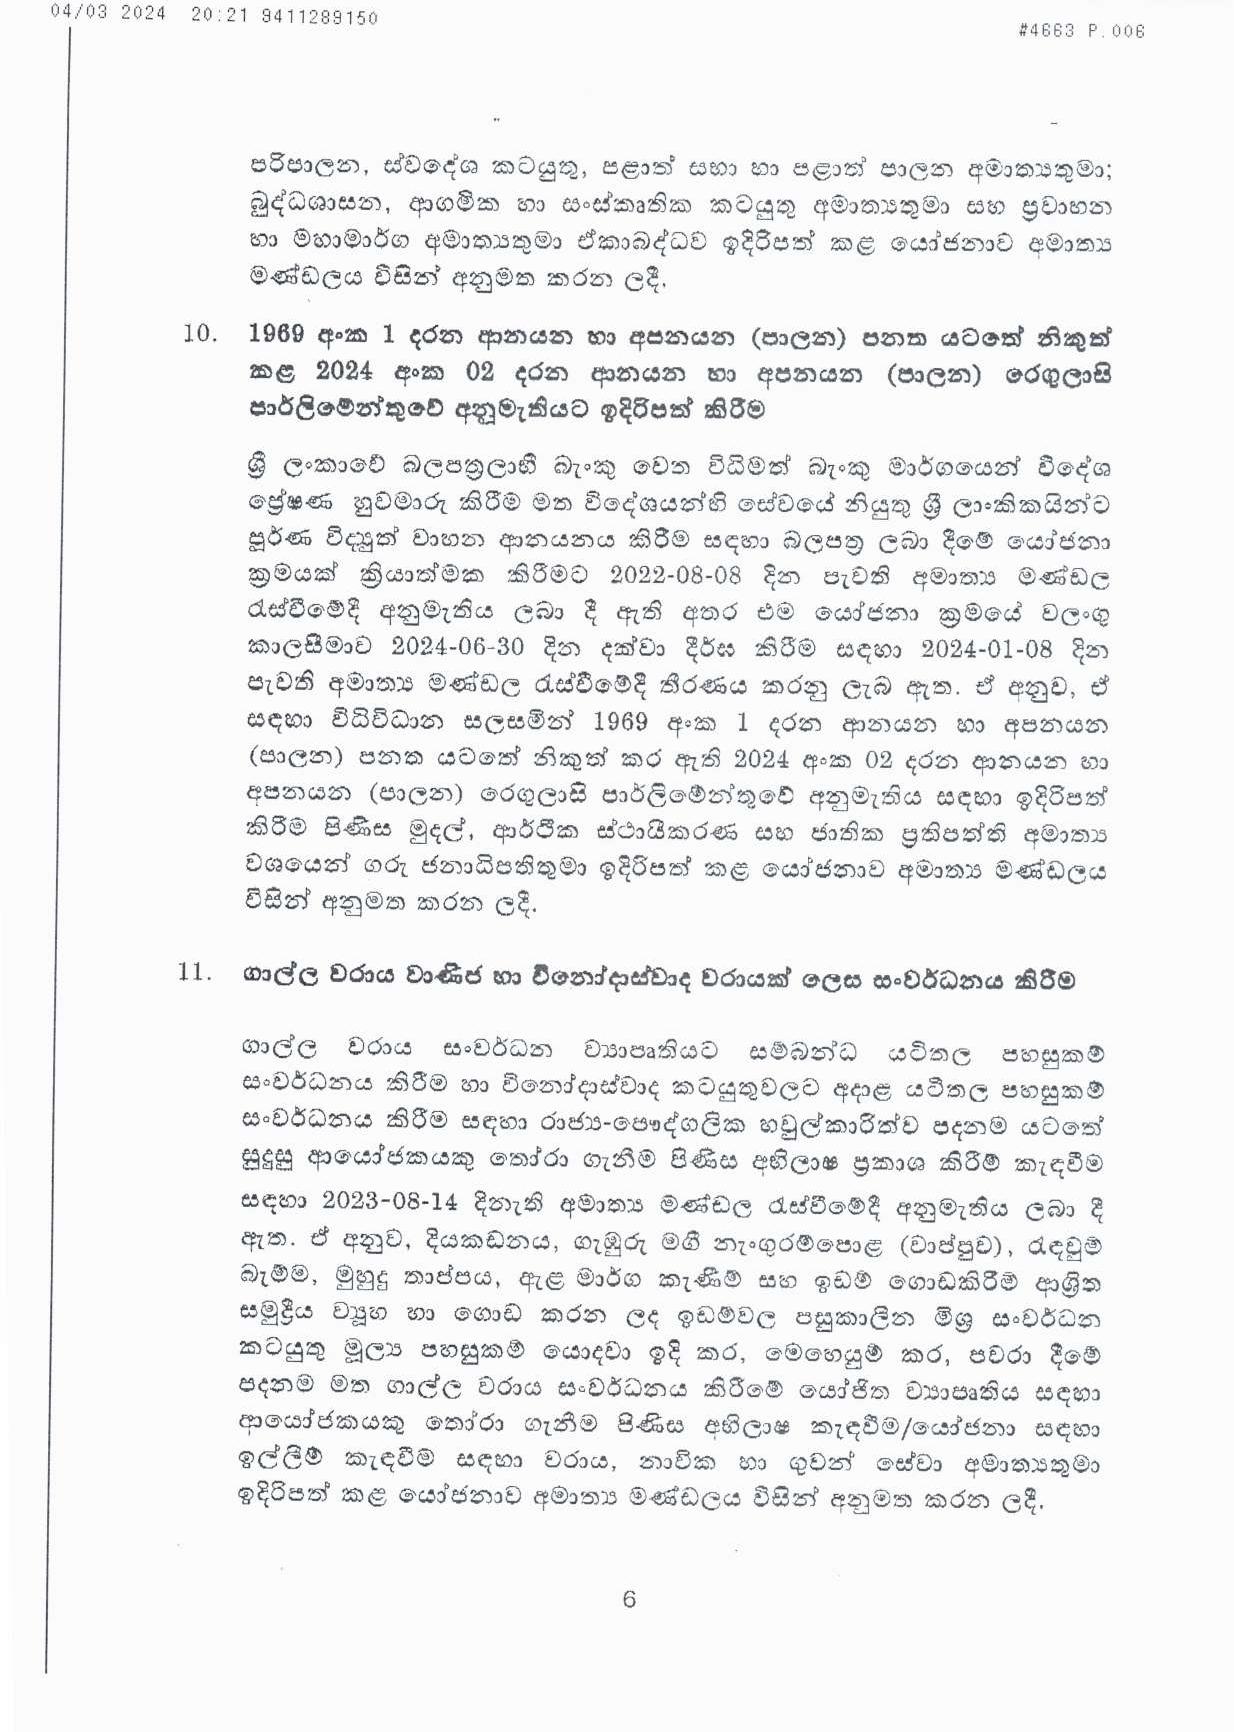 Cabinet Decision on 04.03.2024 page 006